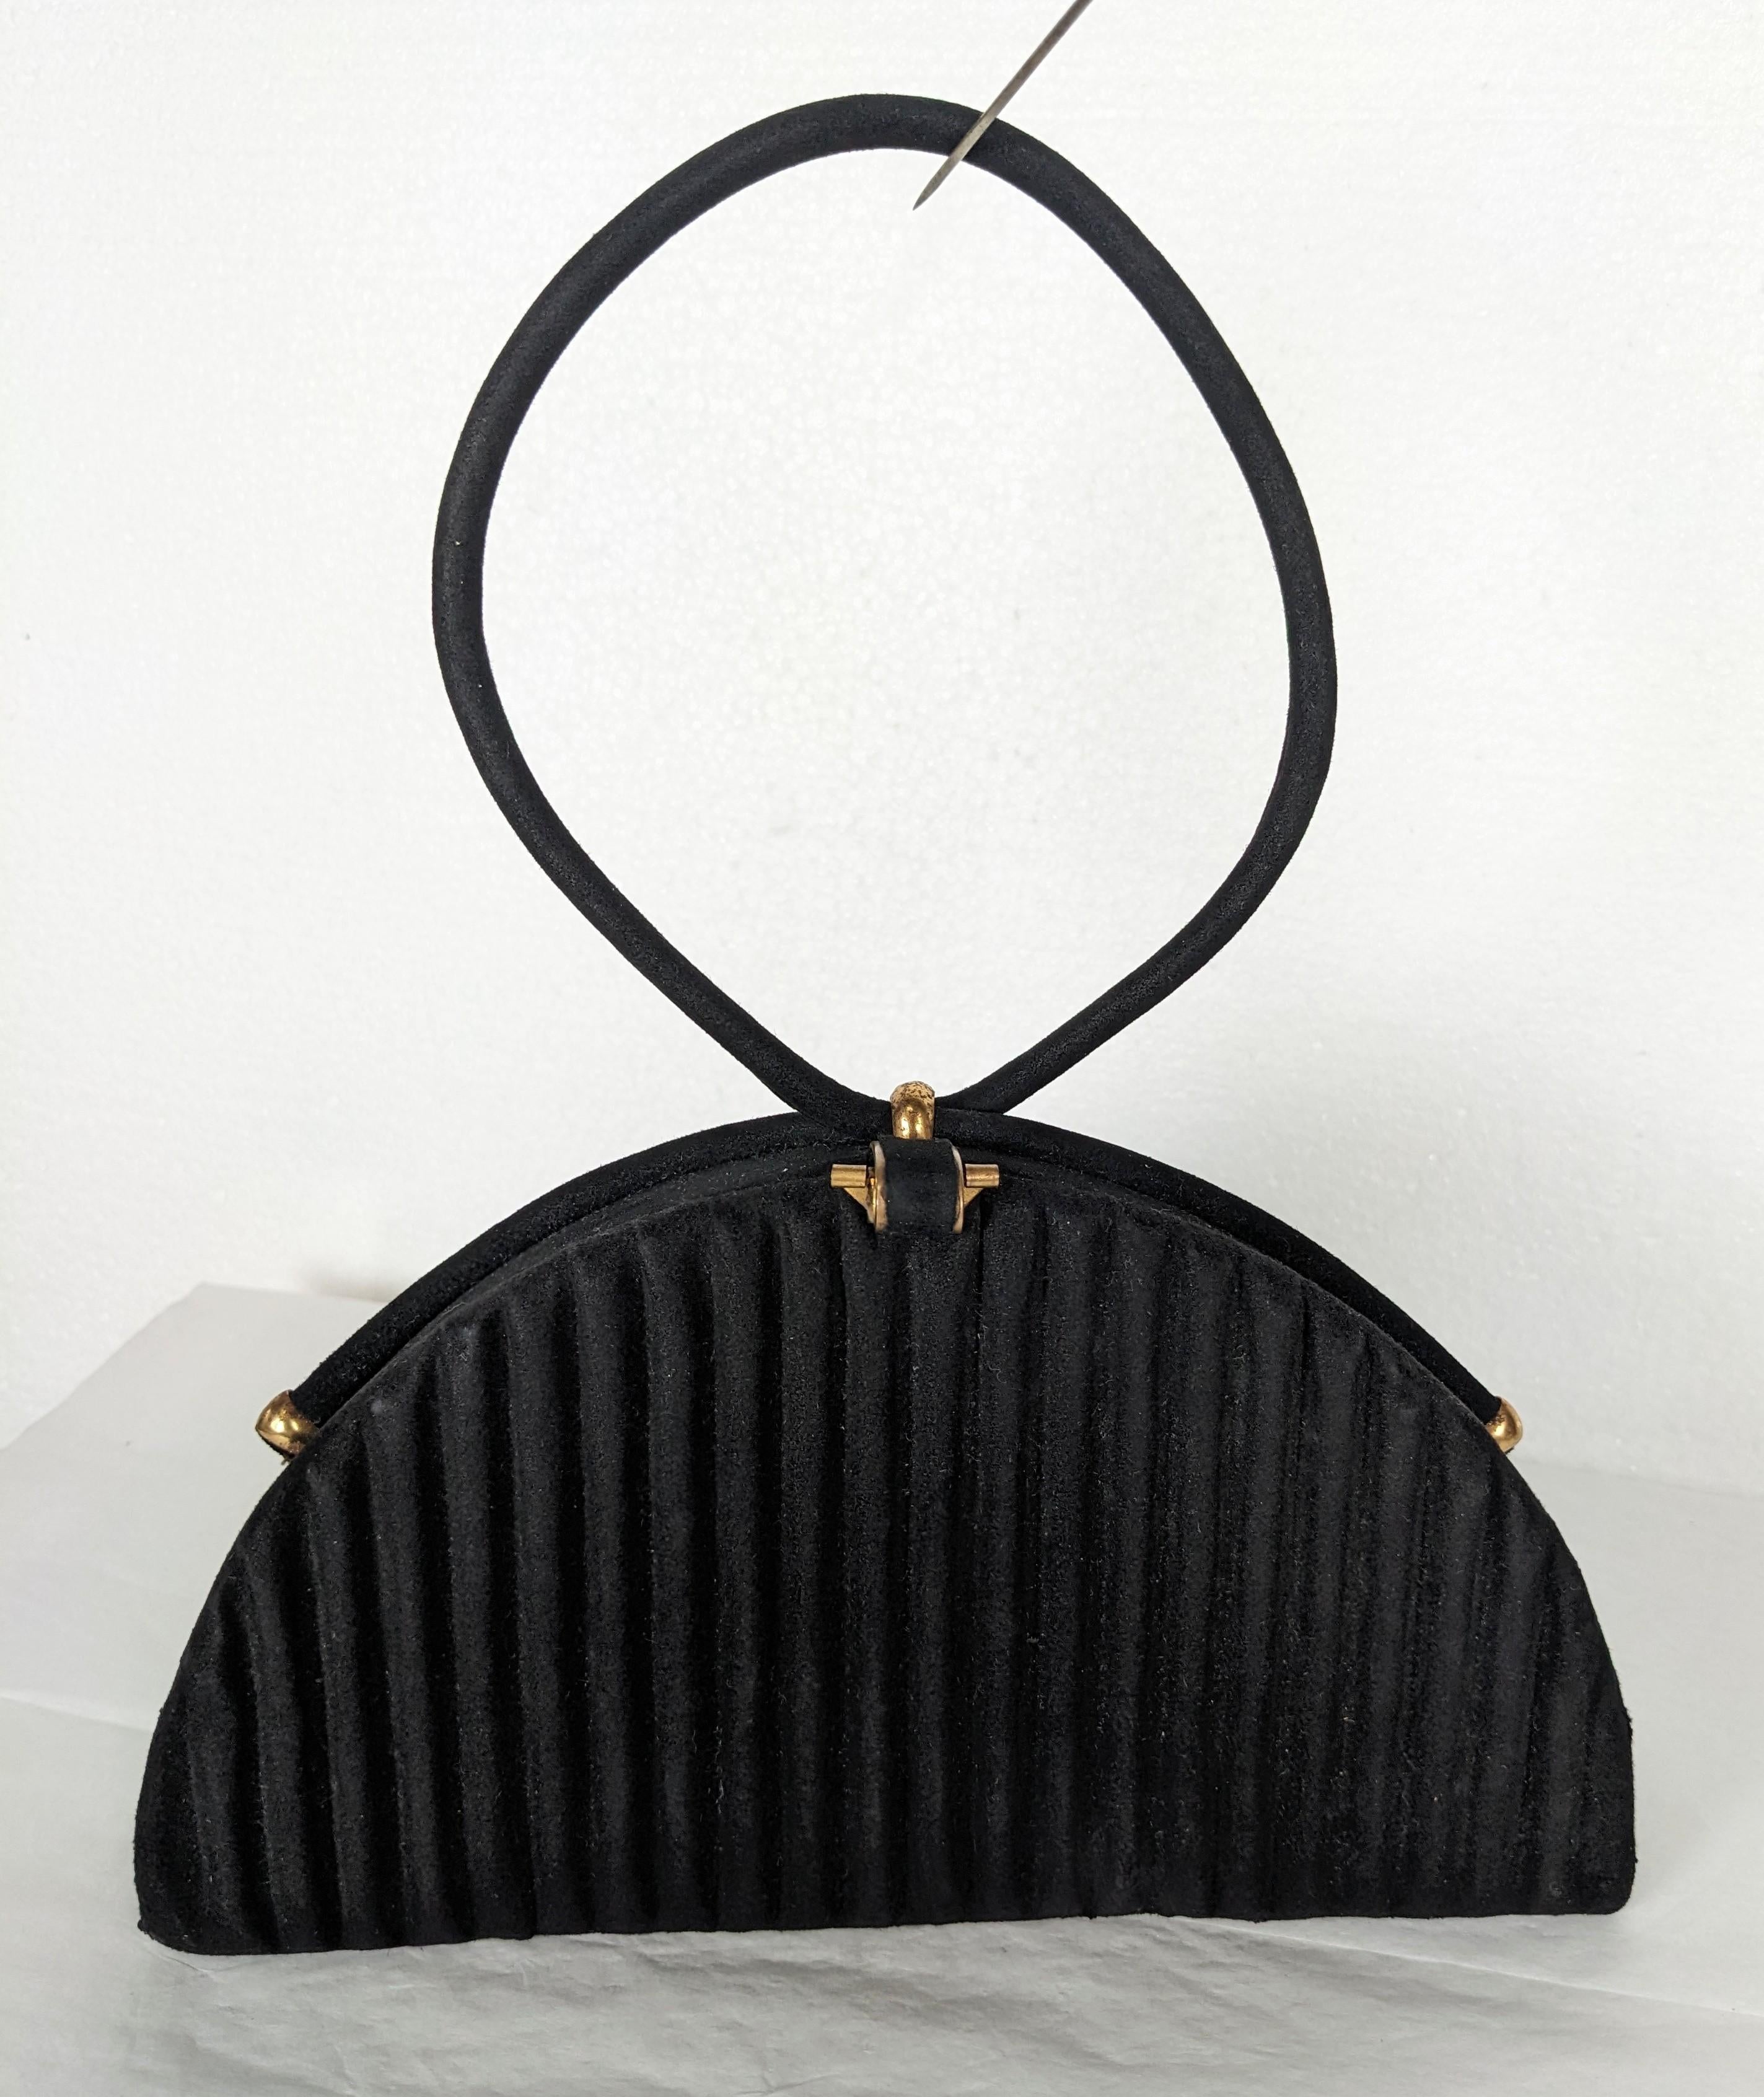 Charming Jean Bernard Figural black suede bag from Paris, 1950's. Black fluted half moon shape with tubular suede loop handle. Faille lining with various compartments. 8.5